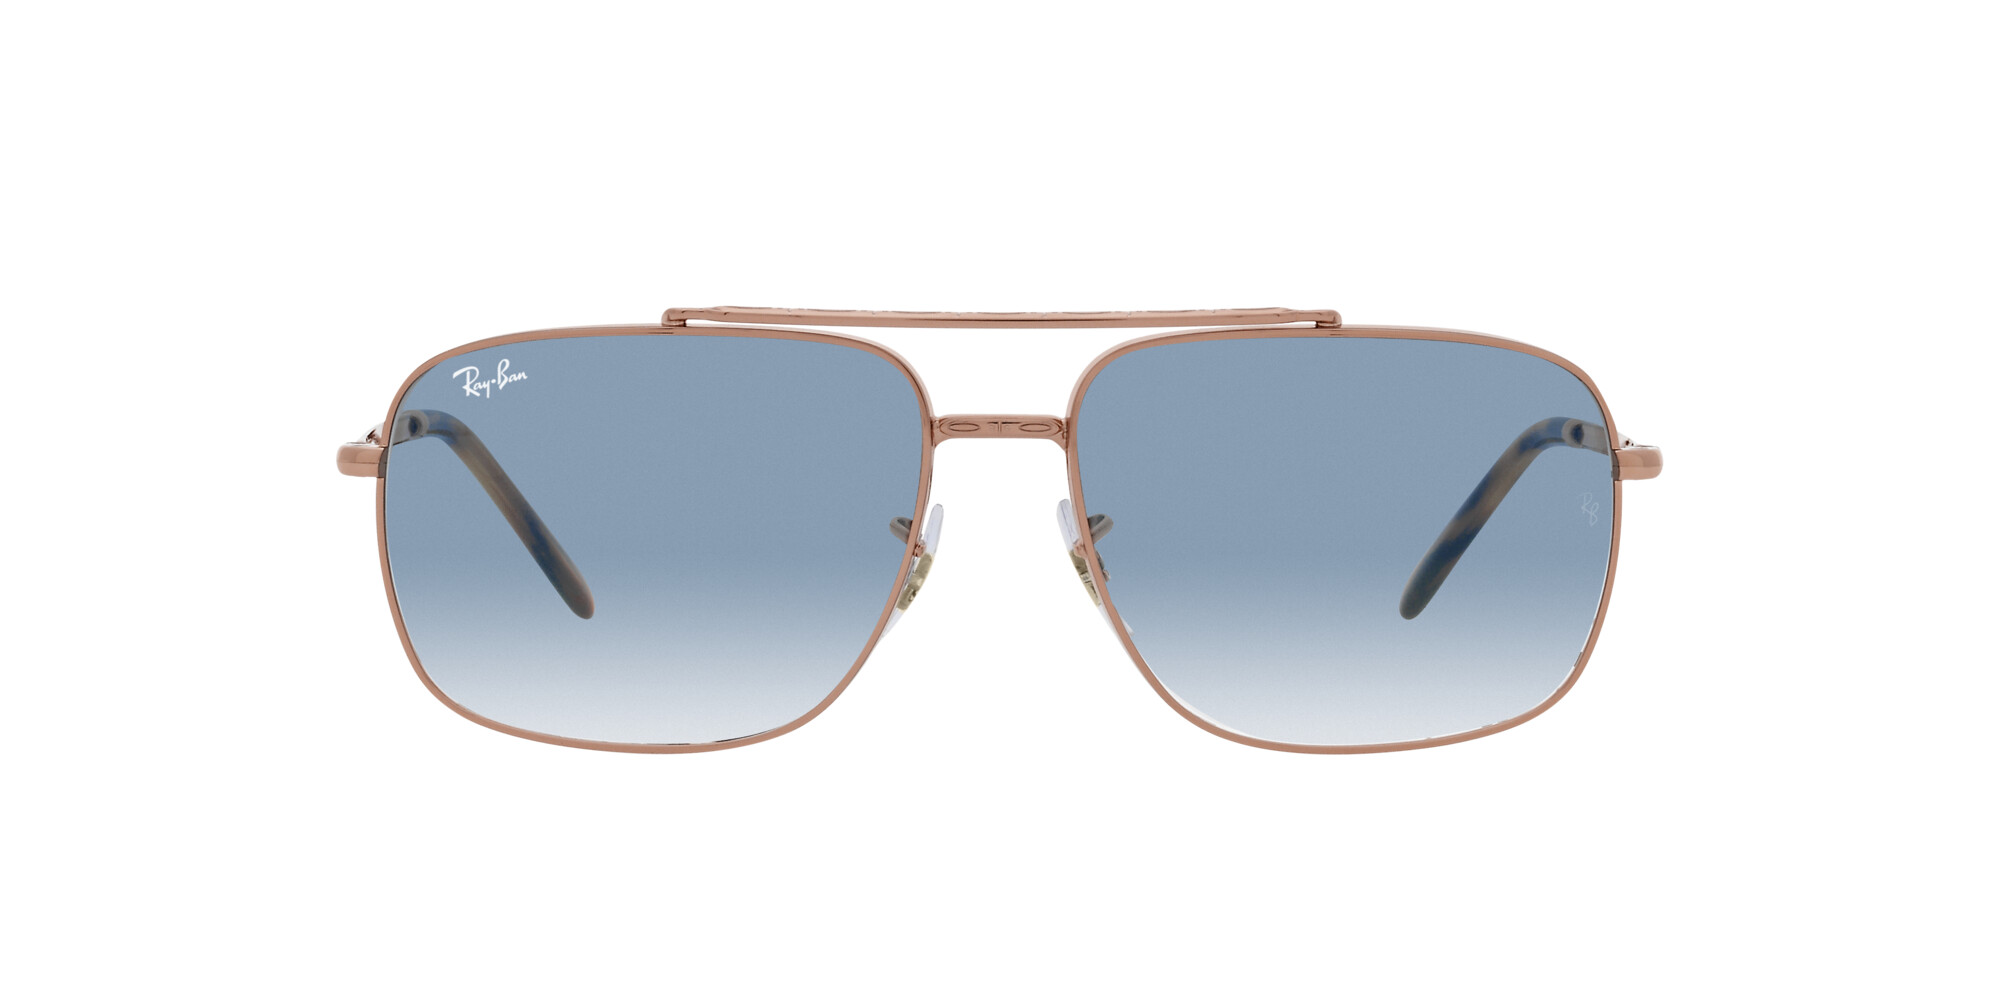 [products.image.front] Ray-Ban 0RB3796 92023F Sonnenbrille